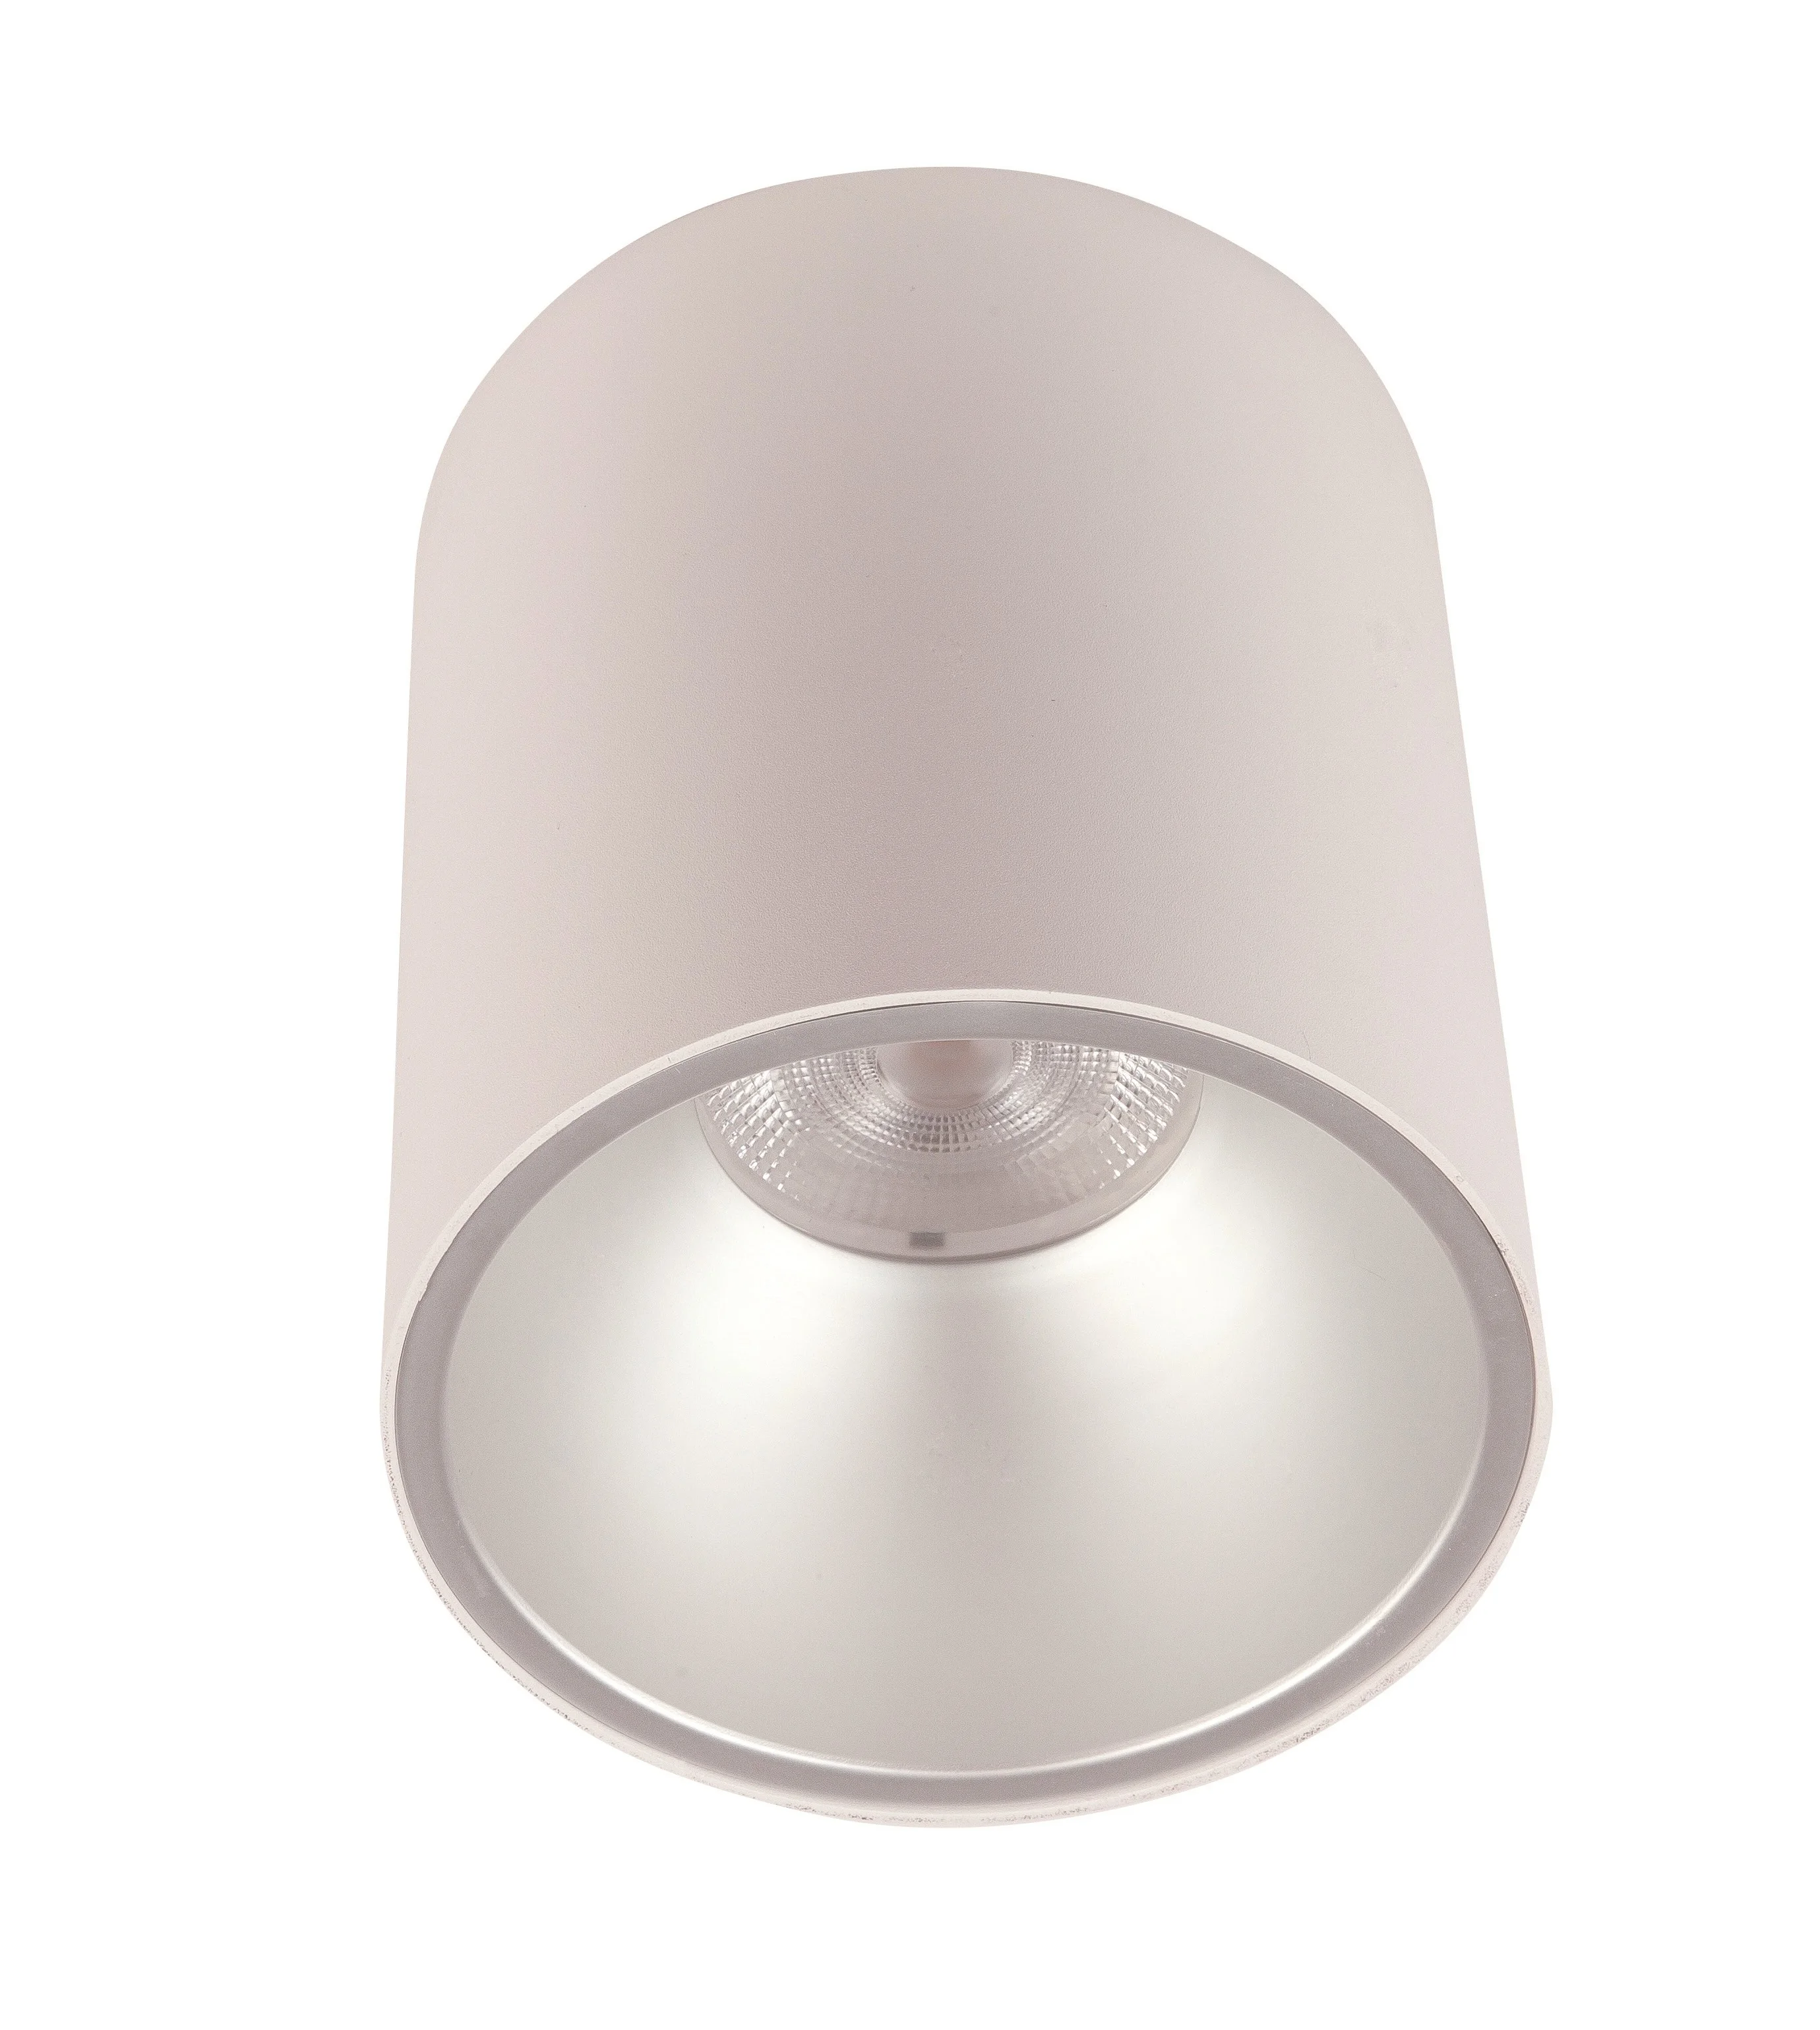 Round 35w 45w hang led ceiling spot light 25w 15w led surface wall ceiling down lights mount bulb lamp